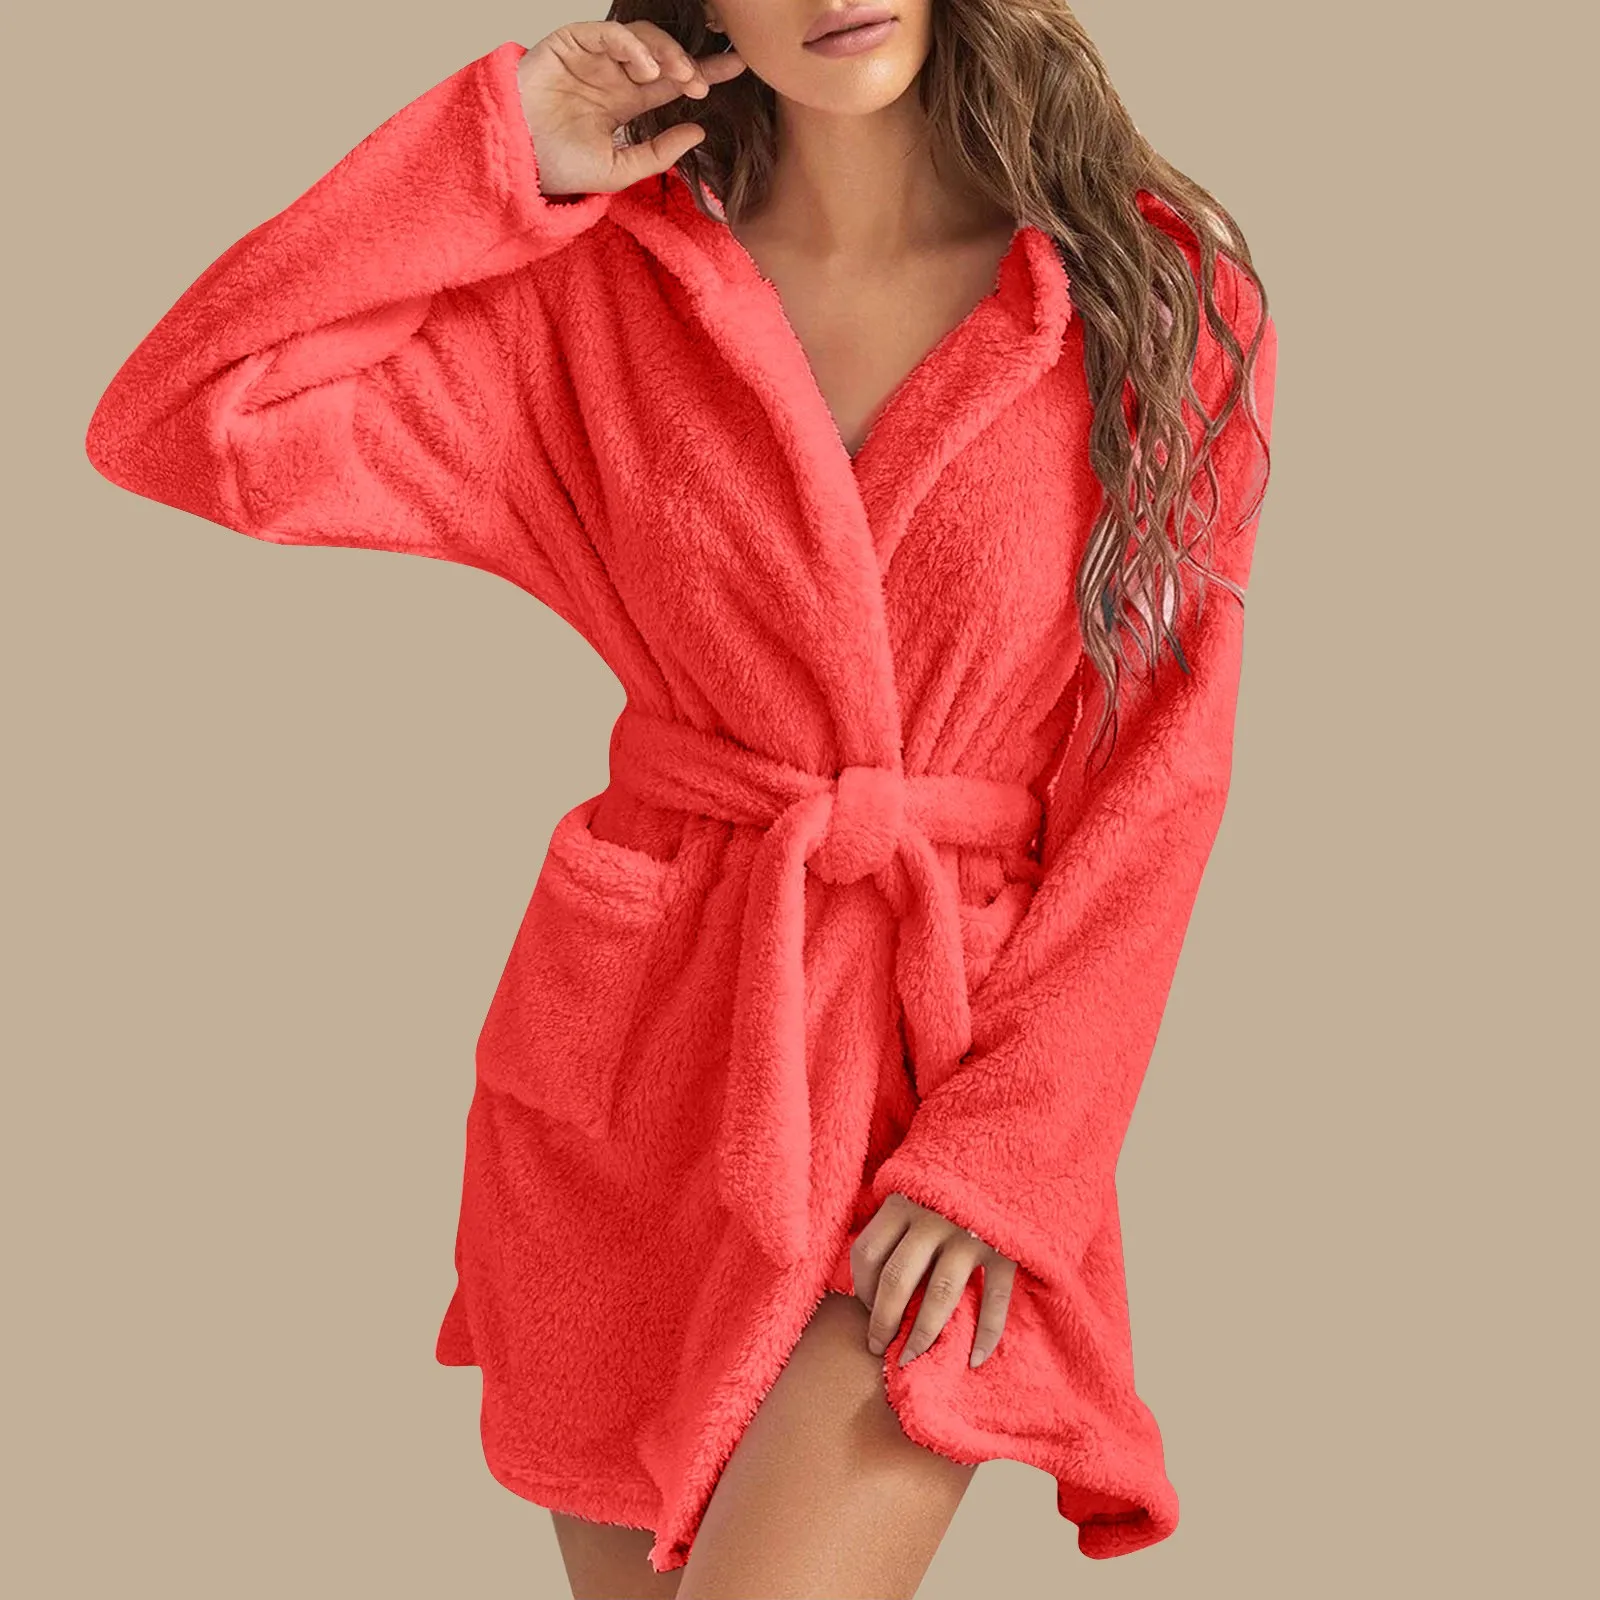 

Coral Velvet Hooded Robe Bathrobe Women Winter Absorbent Thicken Soft Warm Nightgown Robes Lady Fall Home Dressing Gowns Pajamas